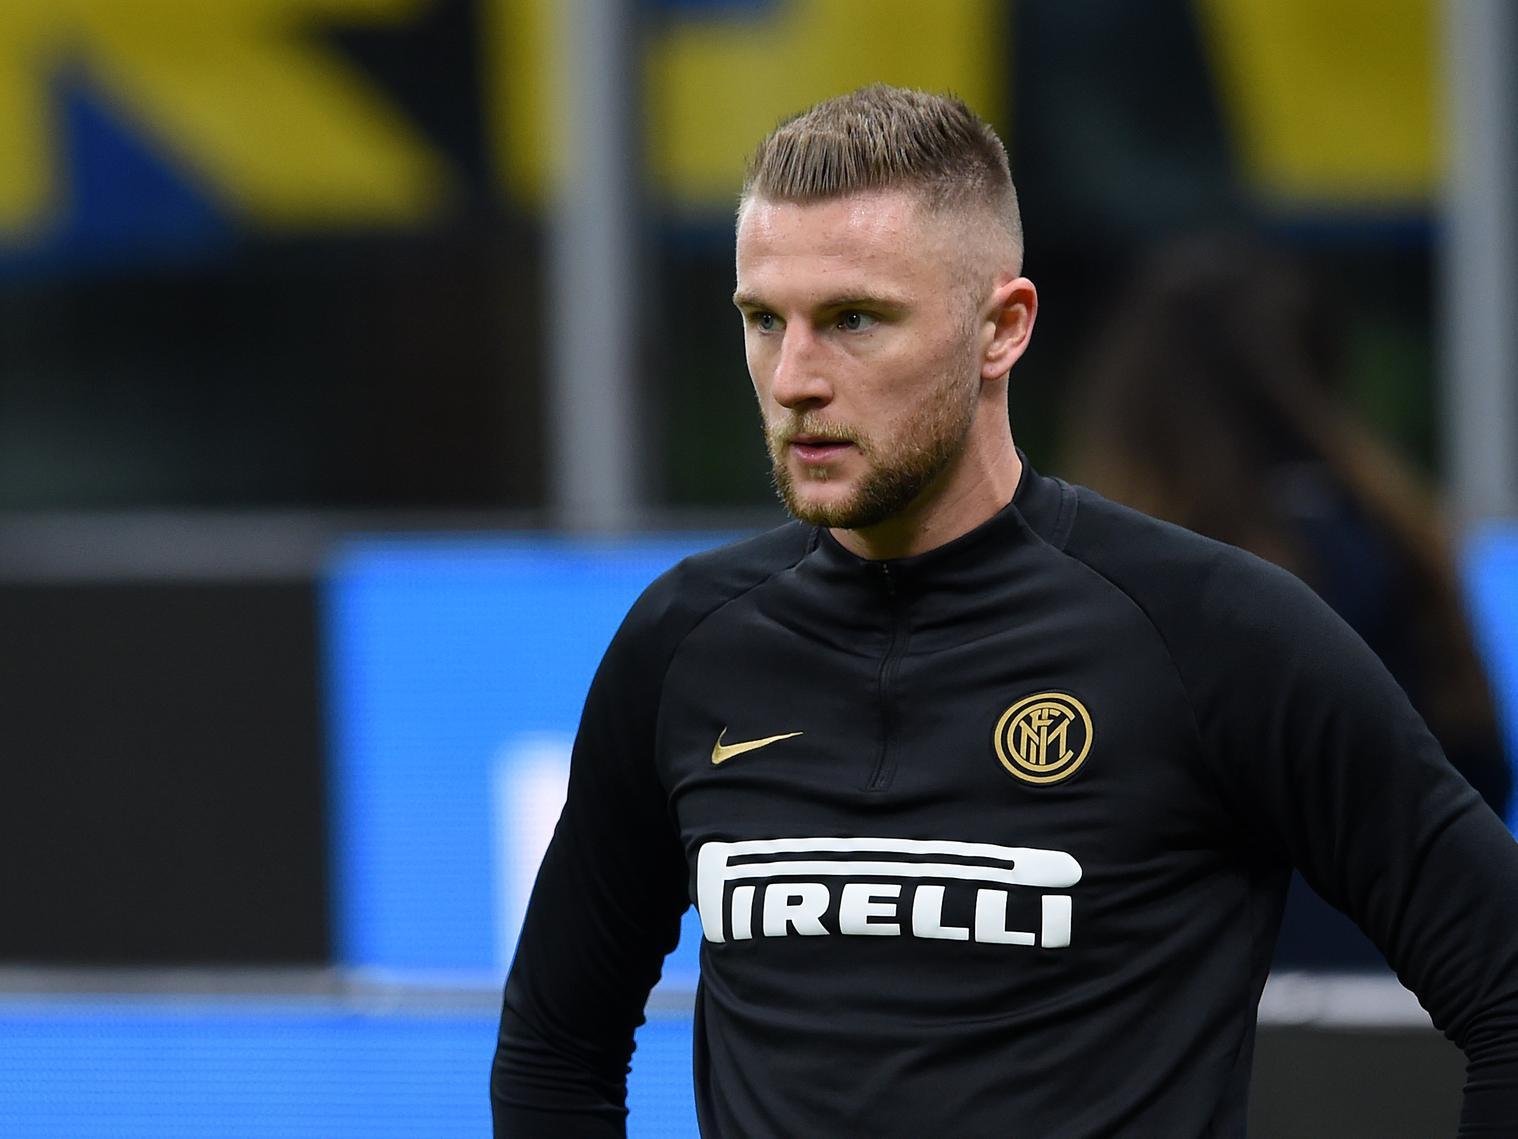 They certainly need one, but chances are they'll keep their powder dry until the summer before spending big. However, reports from Italy suggest they're after Inter's (also appropriately named) Milan Skriniar.